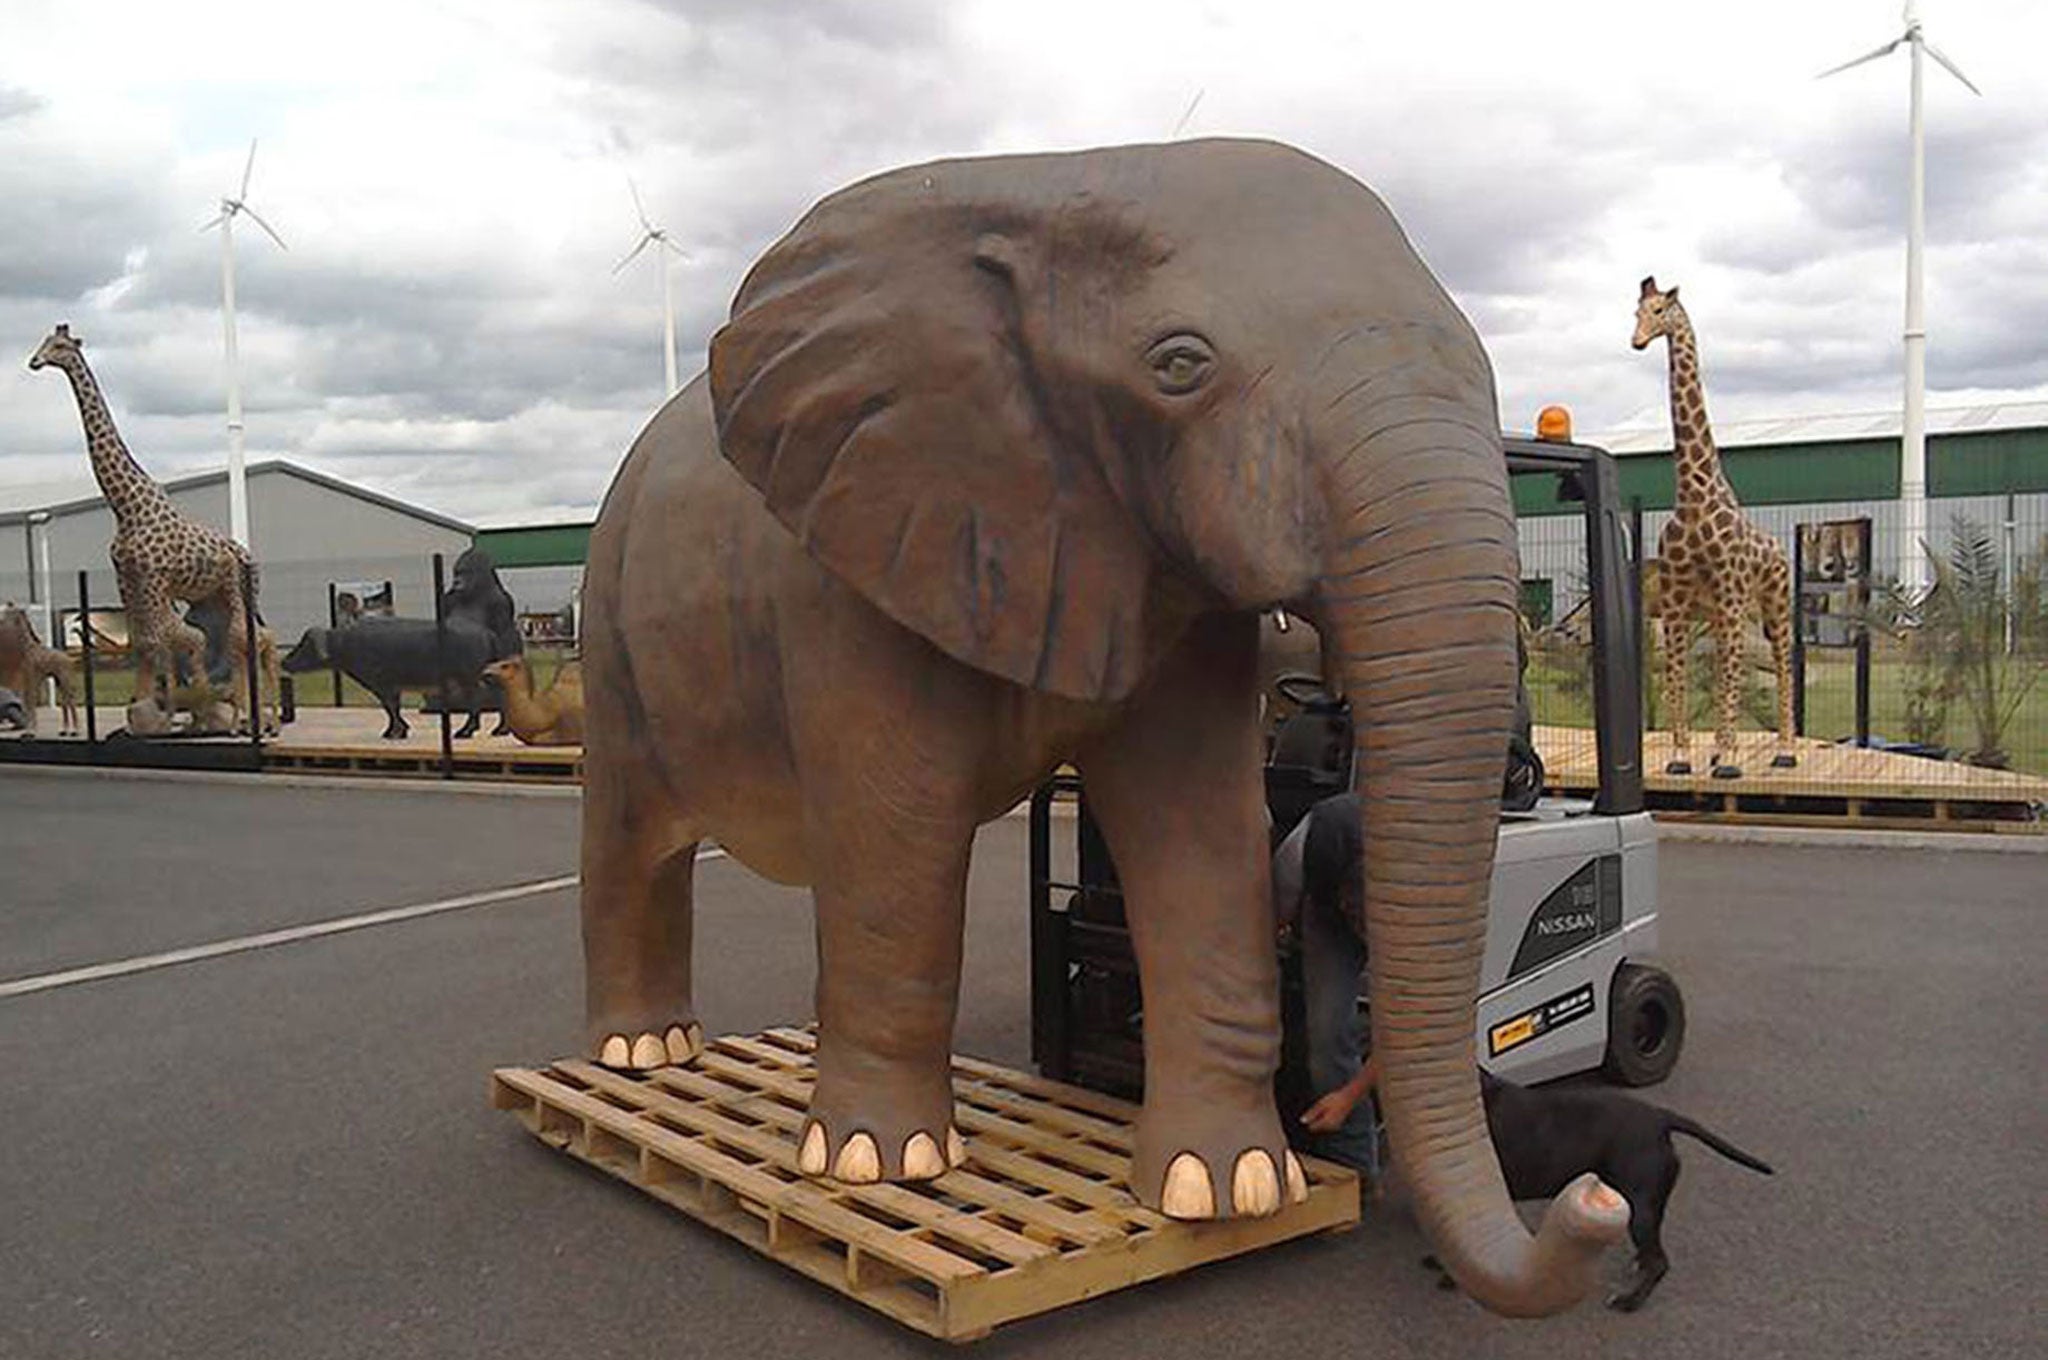 A 10ft plastic replica elephant, which is believed will feature in the last episode of the current series of Top Gear